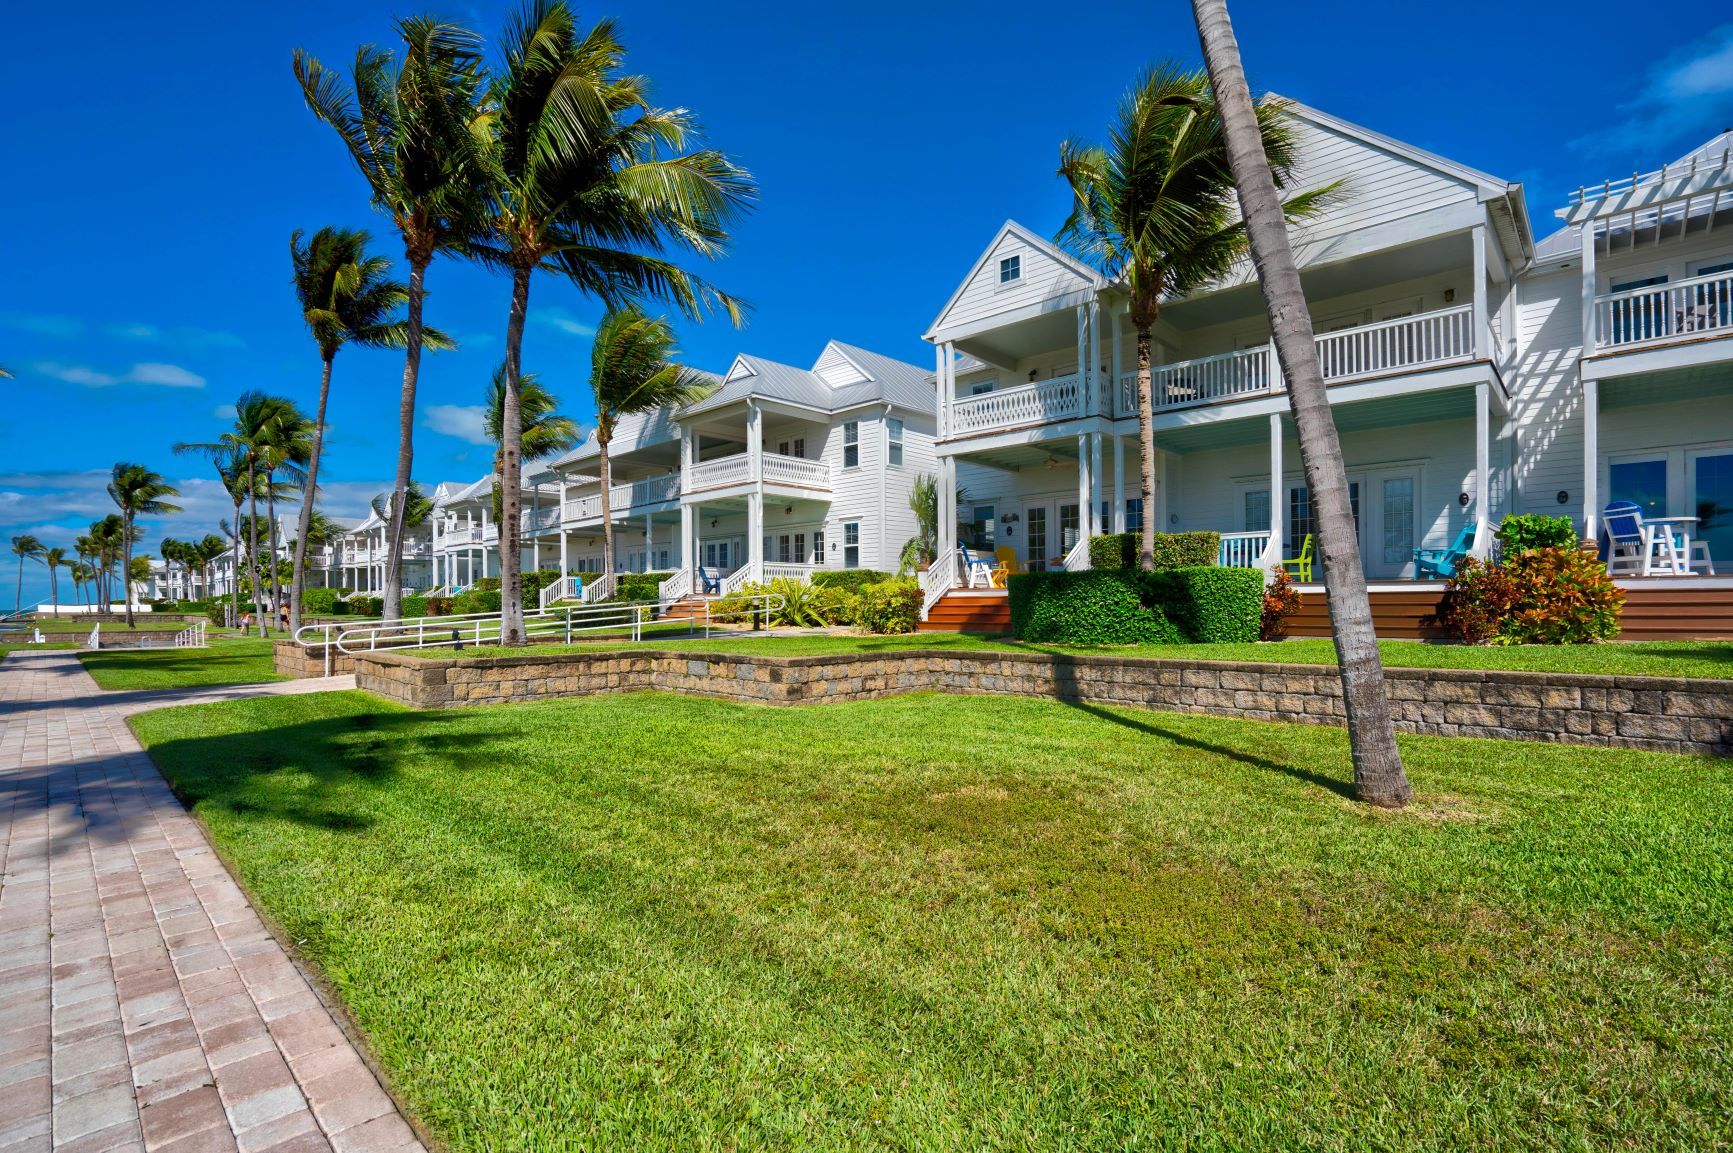 Row of tropical townhouses in the Florida Keys at Indigo Reef